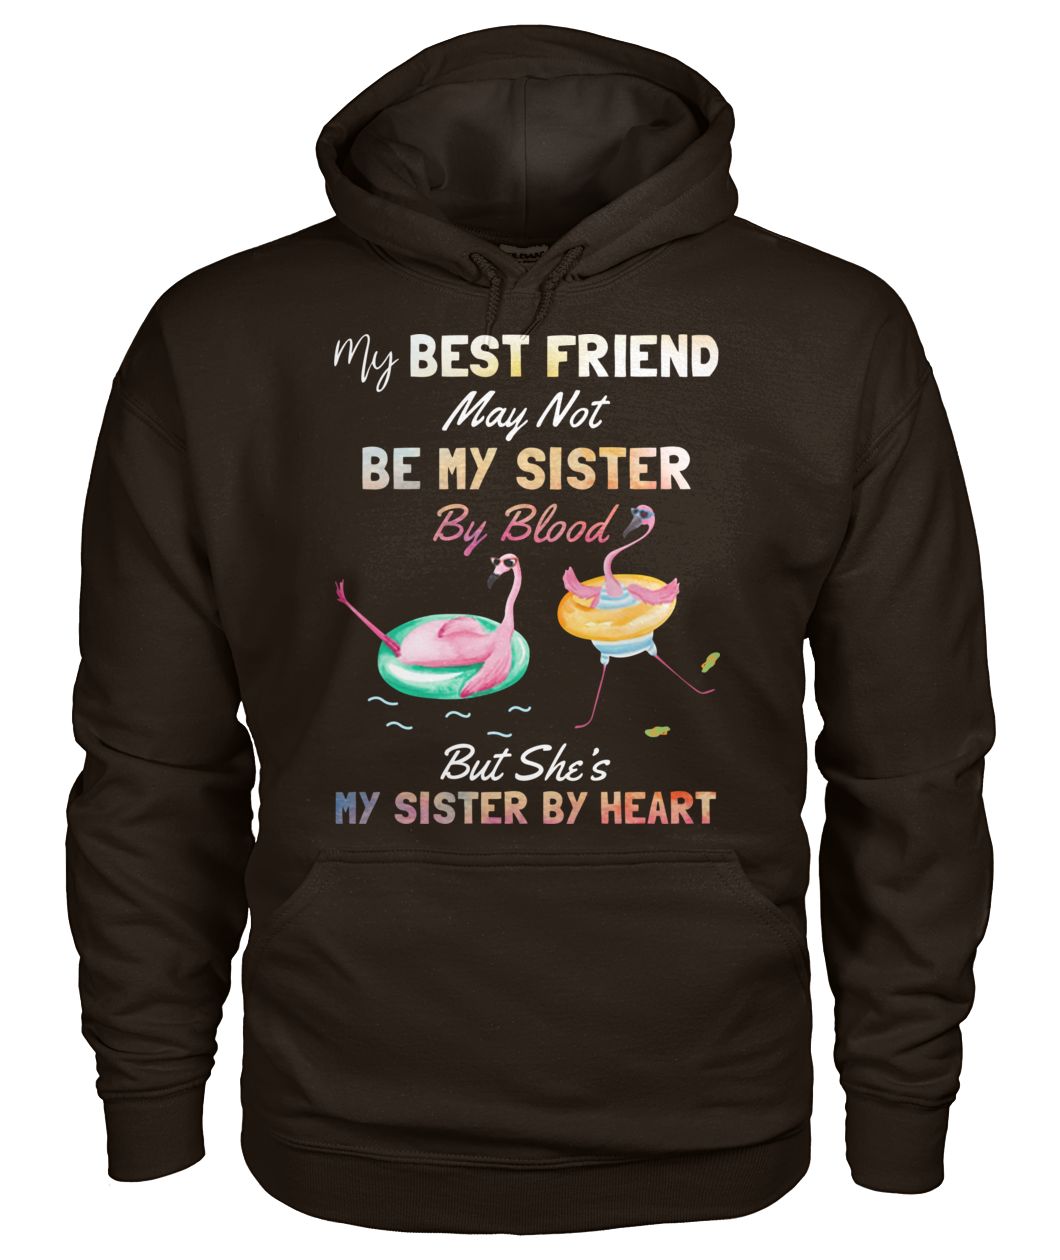 Flamingo my best friend may not be my sister by blood but she's my sister by heart gildan hoodie